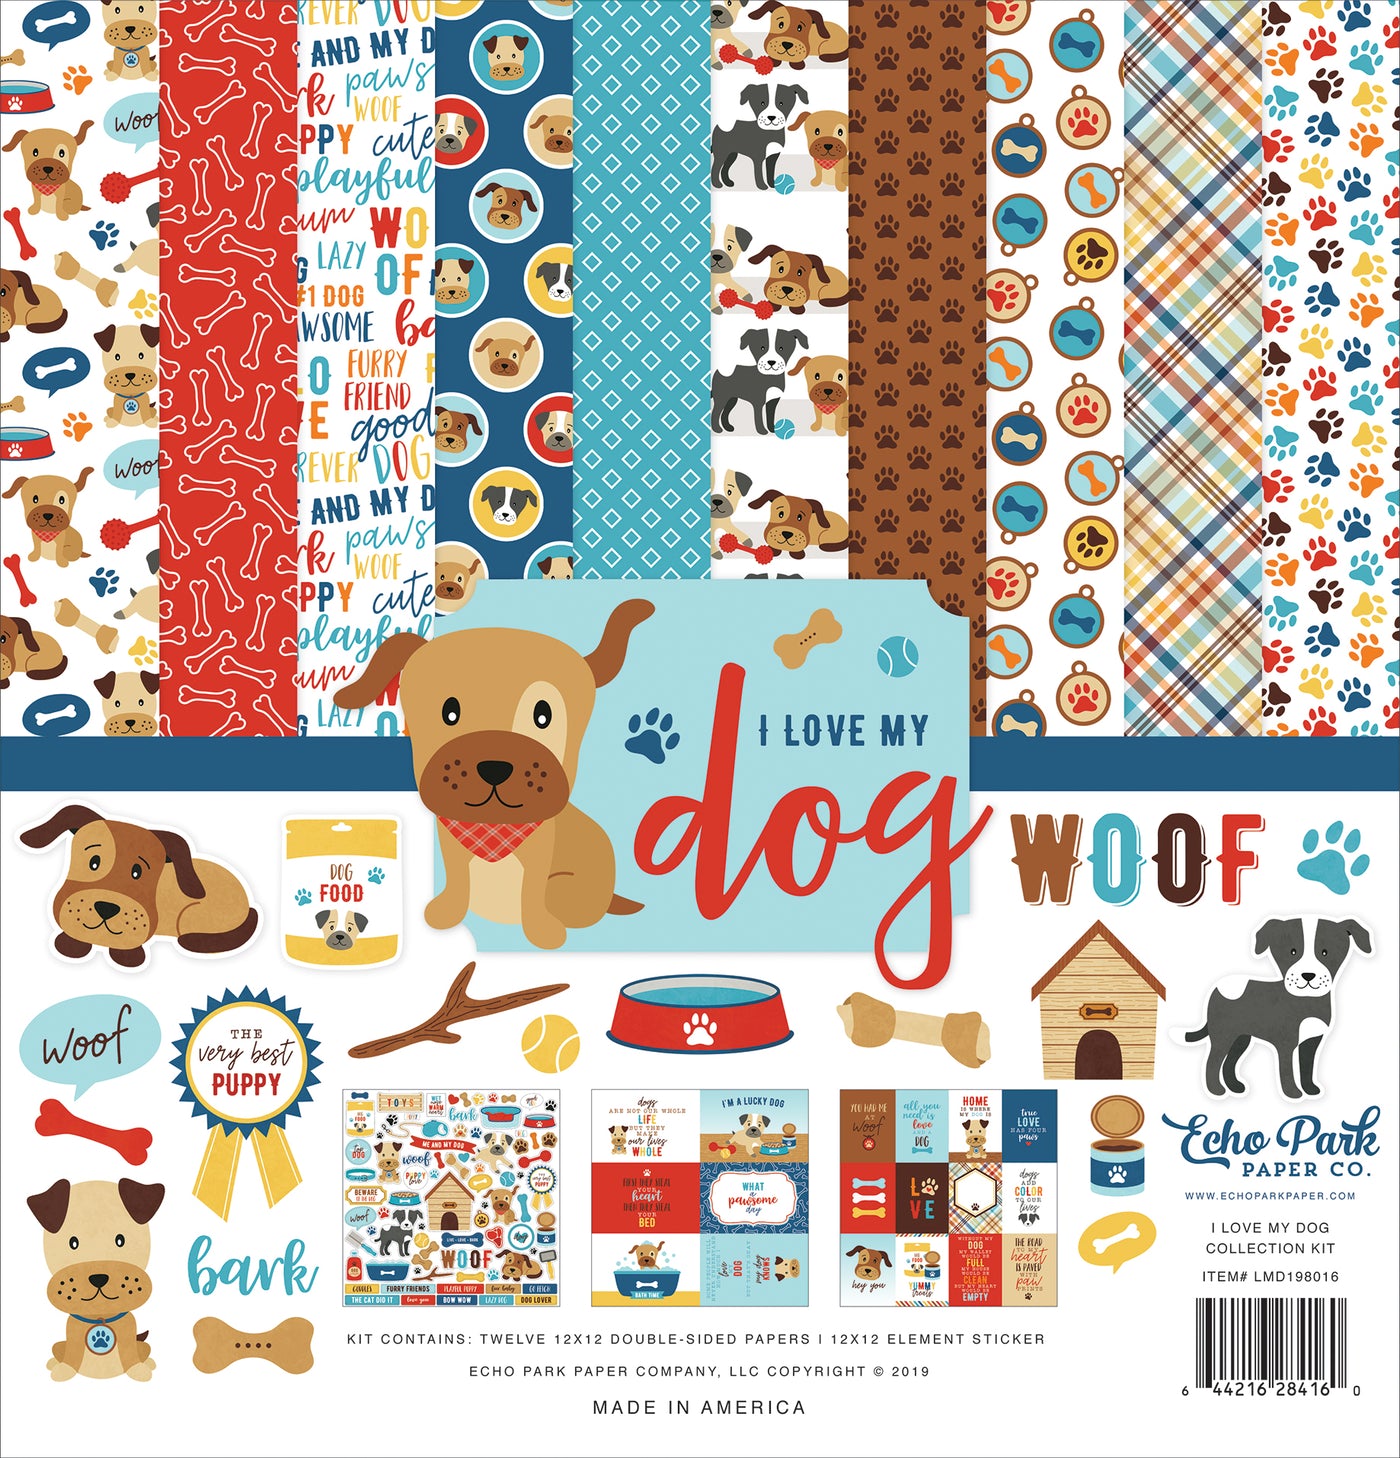 Fun page kit collection for dog lovers everywhere. Perfect phrases and images that evoke memories of Fido, or Spot or, well, you know . . . dog houses, chewing bones, paw prints, and on and on.